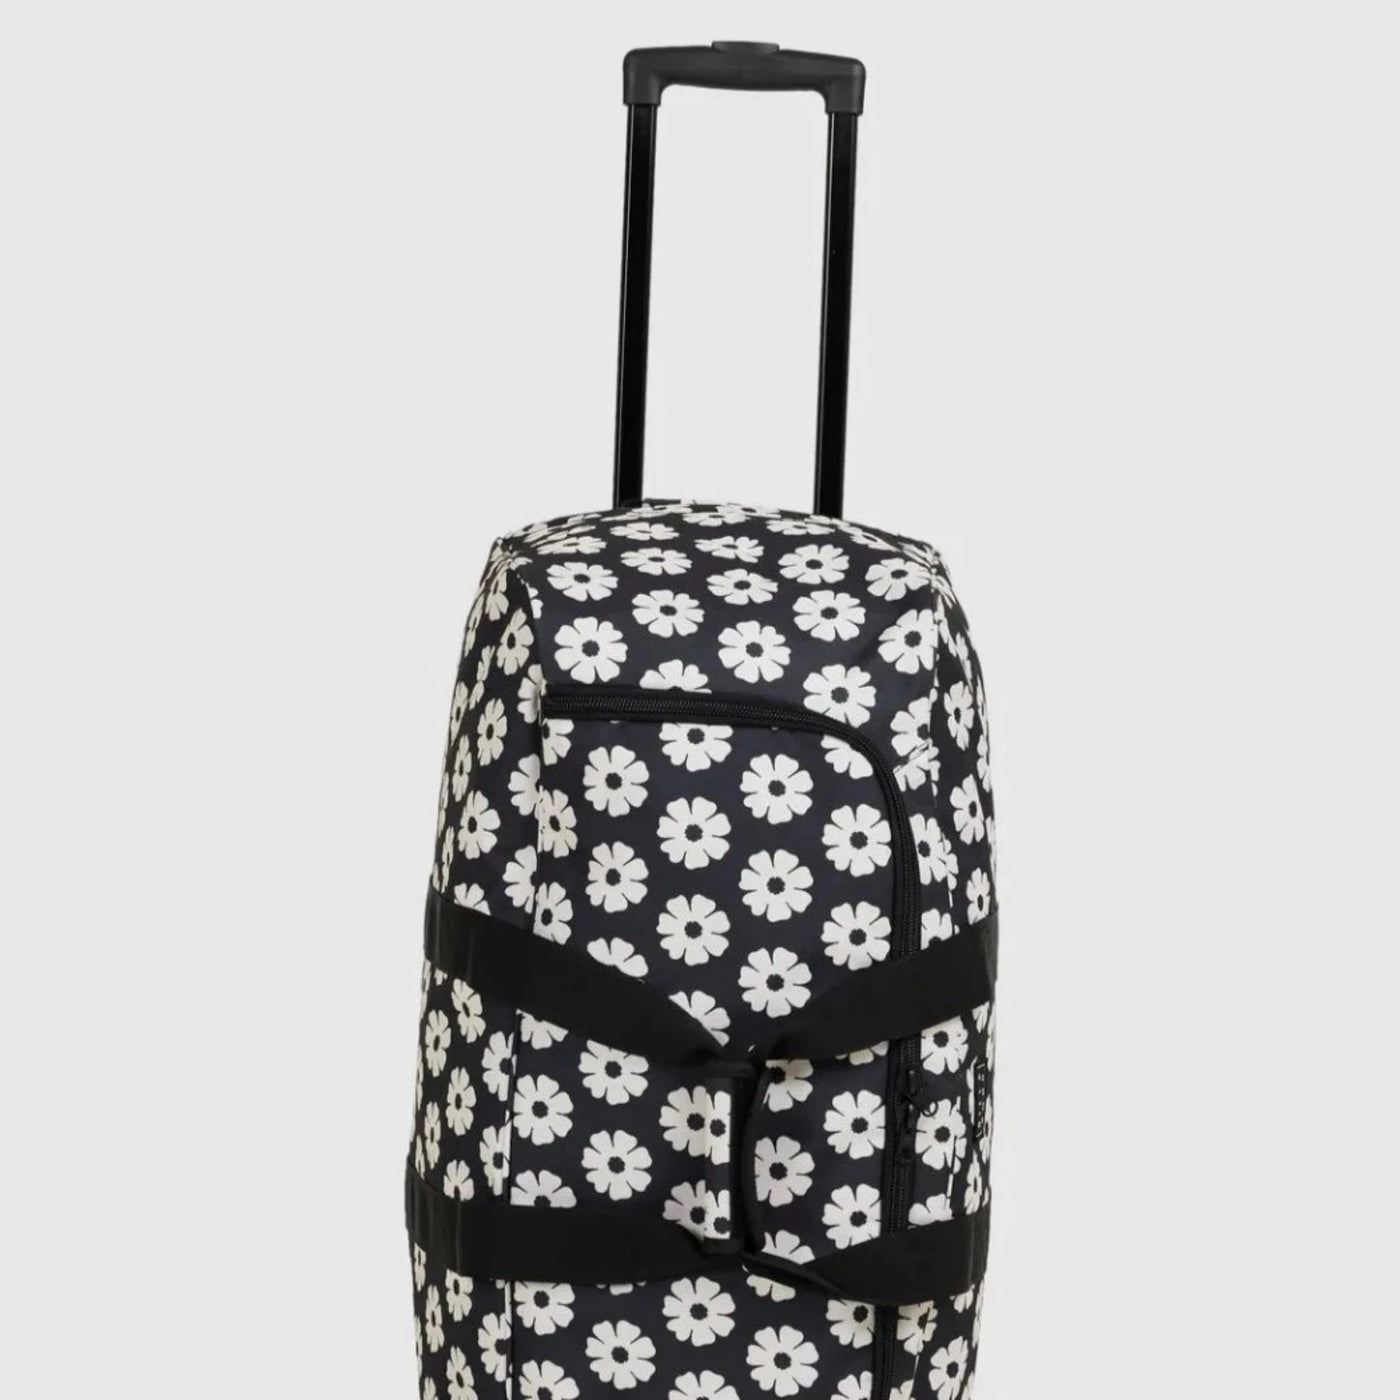 Billabong Check In Luggage - Off Black